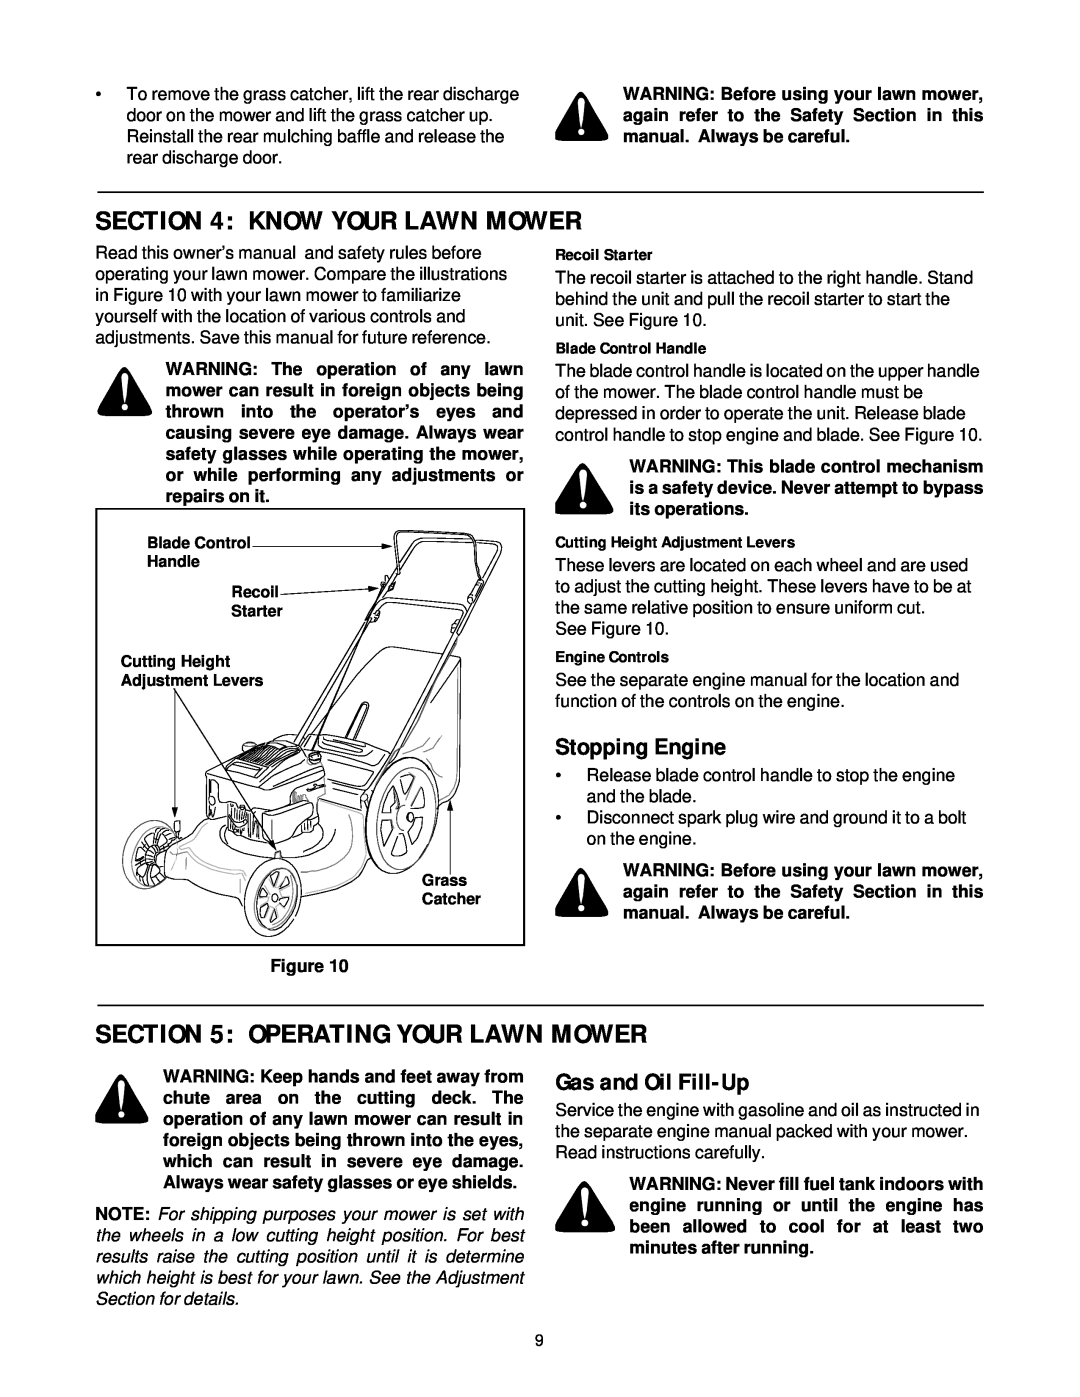 Yard-Man 11A-589C401 Know Your Lawn Mower, Operating Your Lawn Mower, Stopping Engine, Gas and Oil Fill-Up, Recoil Starter 